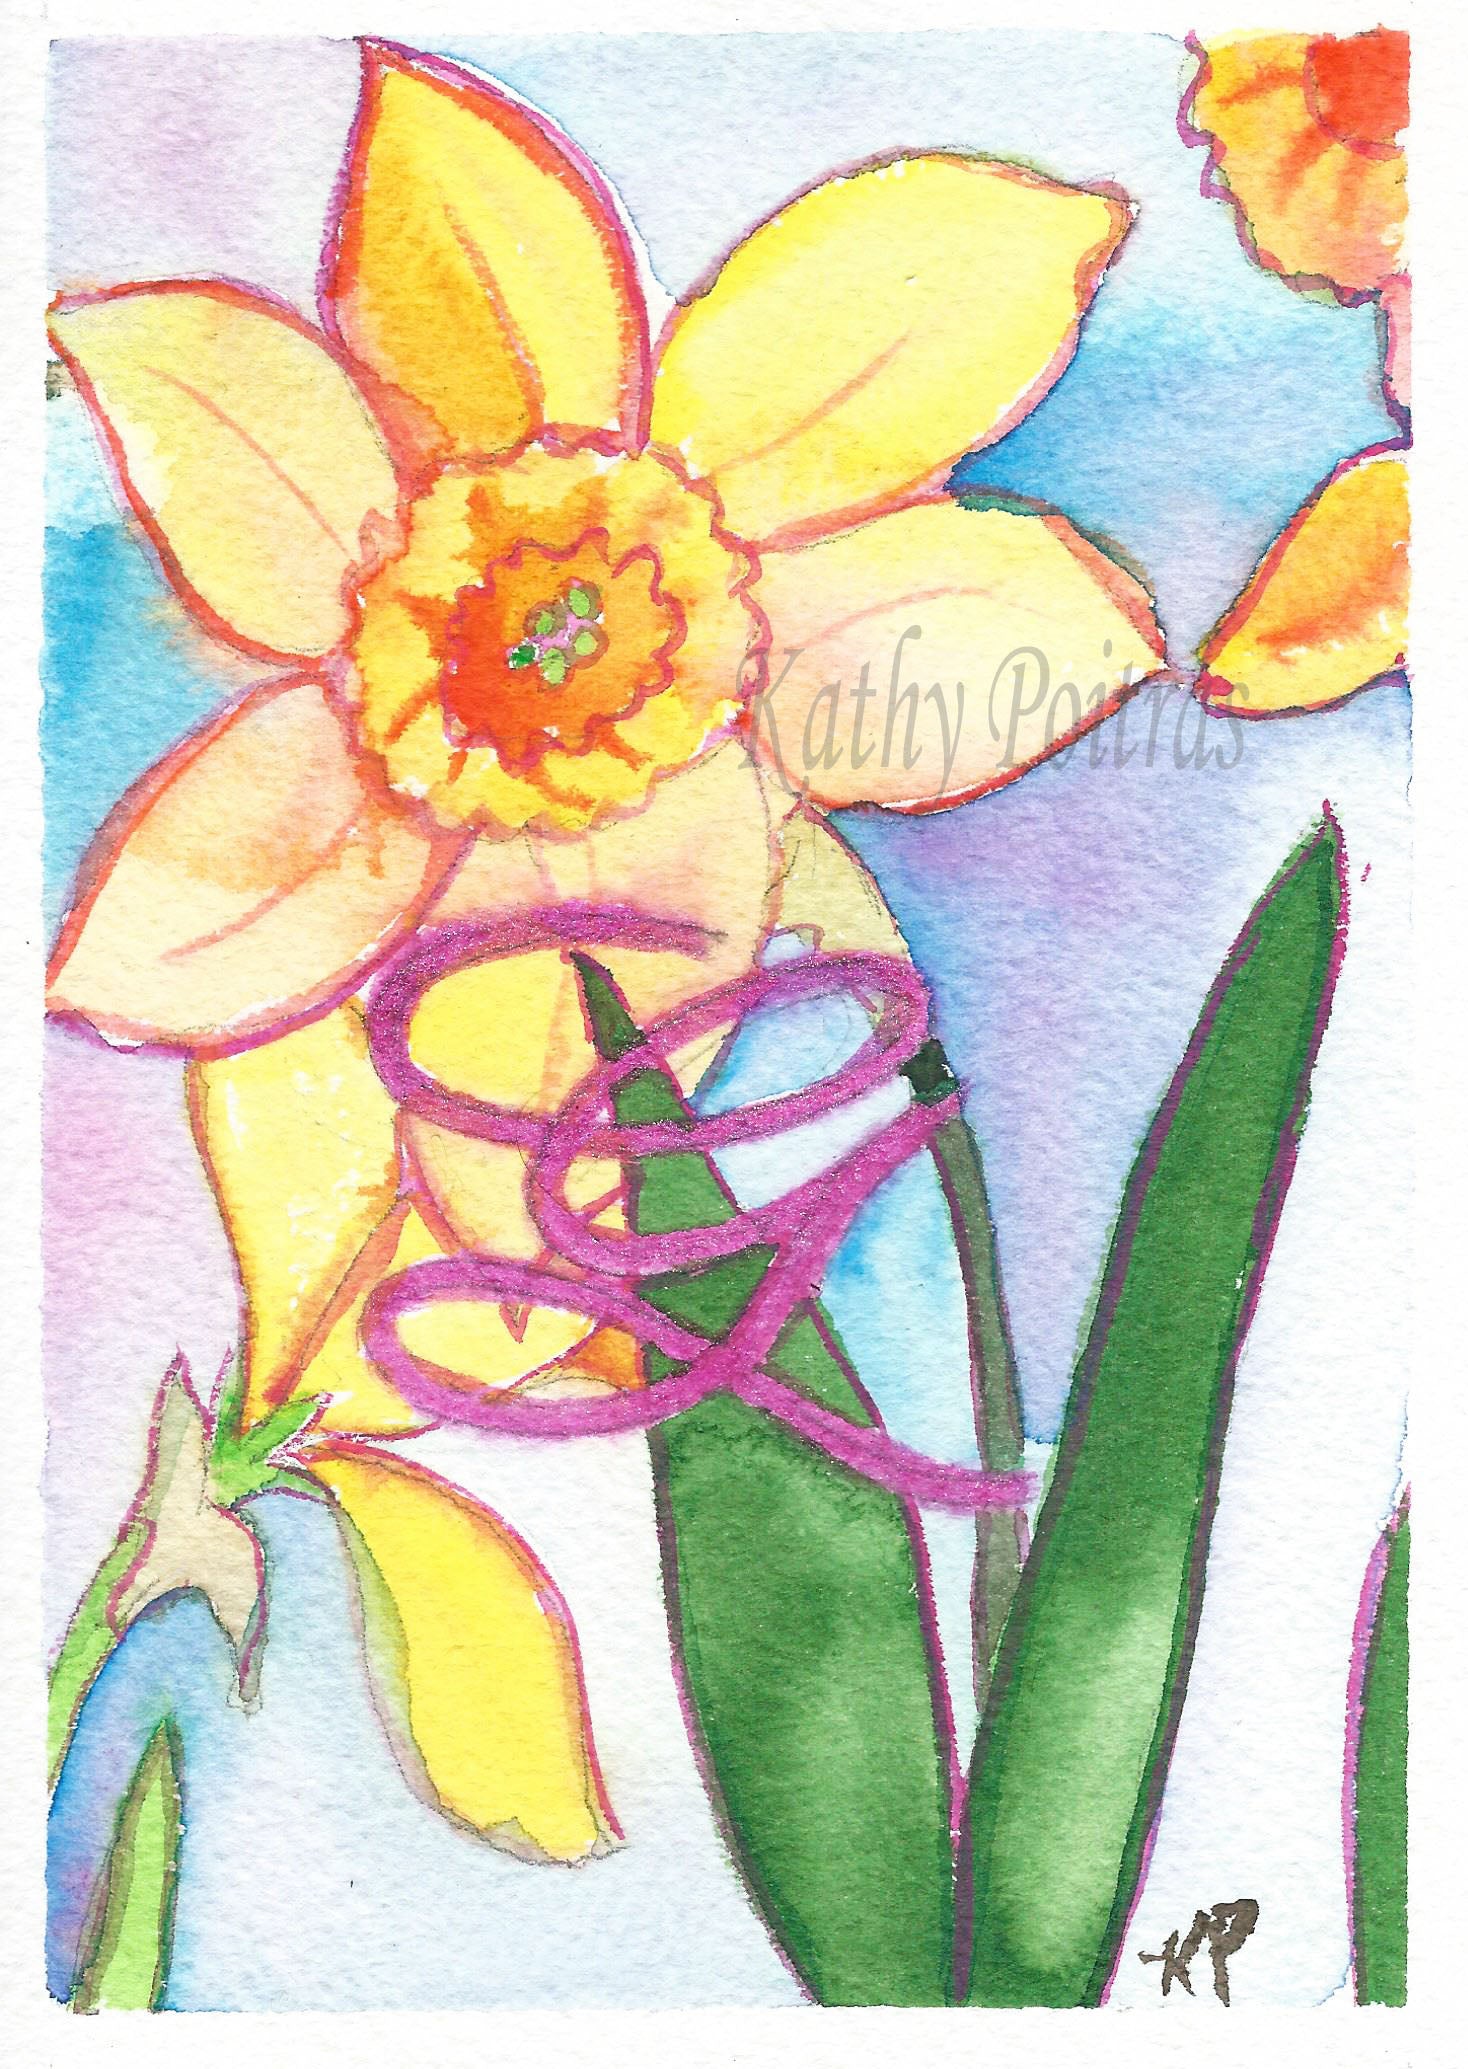 Personalized letter G Birthday Card, Mother's Day Card, of  Daffodils